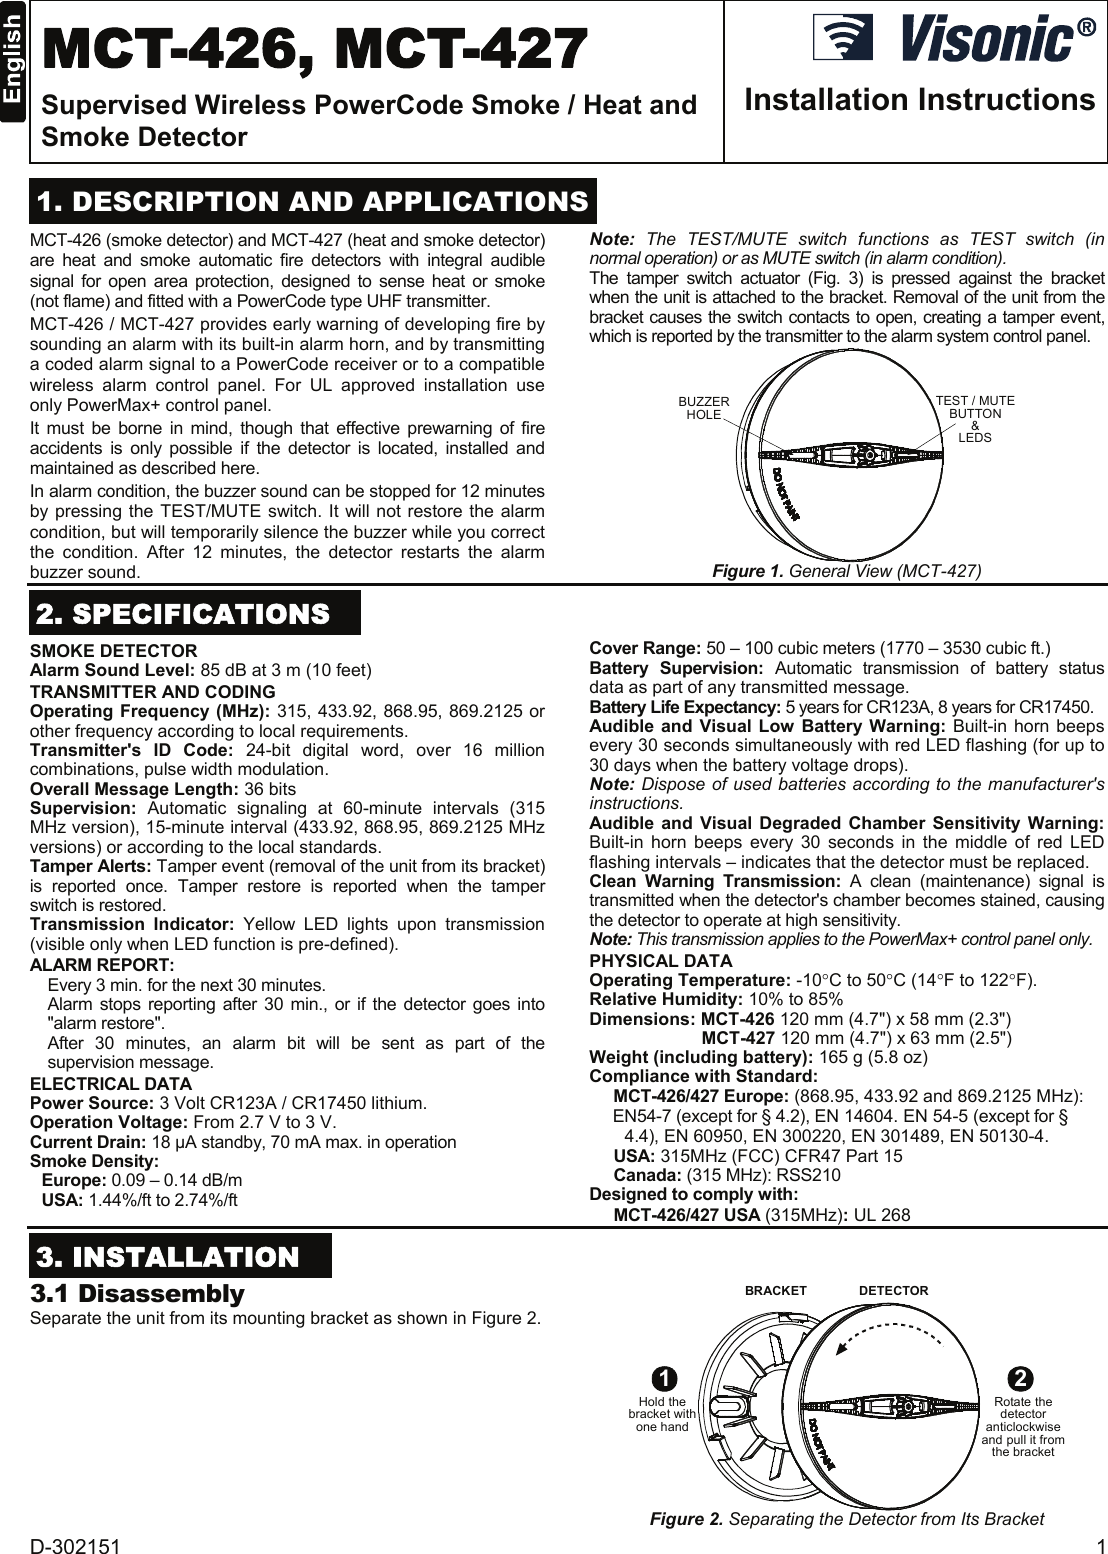 D-302151  1  MCT-426, MCT-427 Supervised Wireless PowerCode Smoke / Heat and Smoke Detector  Installation Instructions  1. DESCRIPTION AND APPLICATIONS MCT-426 (smoke detector) and MCT-427 (heat and smoke detector) are heat and smoke automatic fire detectors with integral audible signal for open area protection, designed to sense heat or smoke (not flame) and fitted with a PowerCode type UHF transmitter. MCT-426 / MCT-427 provides early warning of developing fire by sounding an alarm with its built-in alarm horn, and by transmitting a coded alarm signal to a PowerCode receiver or to a compatible wireless alarm control panel. For UL approved installation use only PowerMax+ control panel. It must be borne in mind, though that effective prewarning of fire accidents is only possible if the detector is located, installed and maintained as described here.  In alarm condition, the buzzer sound can be stopped for 12 minutes by pressing the TEST/MUTE switch. It will not restore the alarm condition, but will temporarily silence the buzzer while you correct the condition. After 12 minutes, the detector restarts the alarm buzzer sound. Note:  The TEST/MUTE switch functions as TEST switch (in normal operation) or as MUTE switch (in alarm condition). The tamper switch actuator (Fig. 3) is pressed against the bracket when the unit is attached to the bracket. Removal of the unit from the bracket causes the switch contacts to open, creating a tamper event, which is reported by the transmitter to the alarm system control panel. BUZZERHOLE TEST / MUTEBUTTON&amp;LEDS Figure 1. General View (MCT-427)  2. SPECIFICATIONS SMOKE DETECTOR Alarm Sound Level: 85 dB at 3 m (10 feet) TRANSMITTER AND CODING Operating Frequency (MHz): 315, 433.92, 868.95, 869.2125 or other frequency according to local requirements. Transmitter&apos;s ID Code: 24-bit digital word, over 16 million combinations, pulse width modulation. Overall Message Length: 36 bits Supervision: Automatic signaling at 60-minute intervals (315 MHz version), 15-minute interval (433.92, 868.95, 869.2125 MHz versions) or according to the local standards. Tamper Alerts: Tamper event (removal of the unit from its bracket) is reported once. Tamper restore is reported when the tamper switch is restored. Transmission  Indicator:  Yellow LED lights upon transmission (visible only when LED function is pre-defined). ALARM REPORT:   Every 3 min. for the next 30 minutes.   Alarm stops reporting after 30 min., or if the detector goes into &quot;alarm restore&quot;. After 30 minutes, an alarm bit will be sent as part of the supervision message. ELECTRICAL DATA Power Source: 3 Volt CR123A / CR17450 lithium. Operation Voltage: From 2.7 V to 3 V. Current Drain: 18 µA standby, 70 mA max. in operation  Smoke Density: Europe: 0.09 – 0.14 dB/m USA: 1.44%/ft to 2.74%/ft Cover Range: 50 – 100 cubic meters (1770 – 3530 cubic ft.) Battery Supervision: Automatic transmission of battery status data as part of any transmitted message. Battery Life Expectancy: 5 years for CR123A, 8 years for CR17450.  Audible and Visual Low Battery Warning: Built-in horn beeps every 30 seconds simultaneously with red LED flashing (for up to 30 days when the battery voltage drops). Note: Dispose of used batteries according to the manufacturer&apos;s instructions. Audible and Visual Degraded Chamber Sensitivity Warning: Built-in horn beeps every 30 seconds in the middle of red LED flashing intervals – indicates that the detector must be replaced. Clean Warning Transmission: A clean (maintenance) signal is transmitted when the detector&apos;s chamber becomes stained, causing the detector to operate at high sensitivity. Note: This transmission applies to the PowerMax+ control panel only. PHYSICAL DATA Operating Temperature: -10°C to 50°C (14°F to 122°F). Relative Humidity: 10% to 85% Dimensions: MCT-426 120 mm (4.7&quot;) x 58 mm (2.3&quot;) MCT-427 120 mm (4.7&quot;) x 63 mm (2.5&quot;) Weight (including battery): 165 g (5.8 oz) Compliance with Standard:  MCT-426/427 Europe: (868.95, 433.92 and 869.2125 MHz): EN54-7 (except for § 4.2), EN 14604. EN 54-5 (except for § 4.4), EN 60950, EN 300220, EN 301489, EN 50130-4. USA: 315MHz (FCC) CFR47 Part 15 Canada: (315 MHz): RSS210 Designed to comply with:  MCT-426/427 USA (315MHz): UL 268  3. INSTALLATION  3.1 Disassembly Separate the unit from its mounting bracket as shown in Figure 2.  BRACKET DETECTOR1Hold thebracket withone hand2Rotate thedetectoranticlockwiseand pull it fromthe bracket Figure 2. Separating the Detector from Its Bracket 